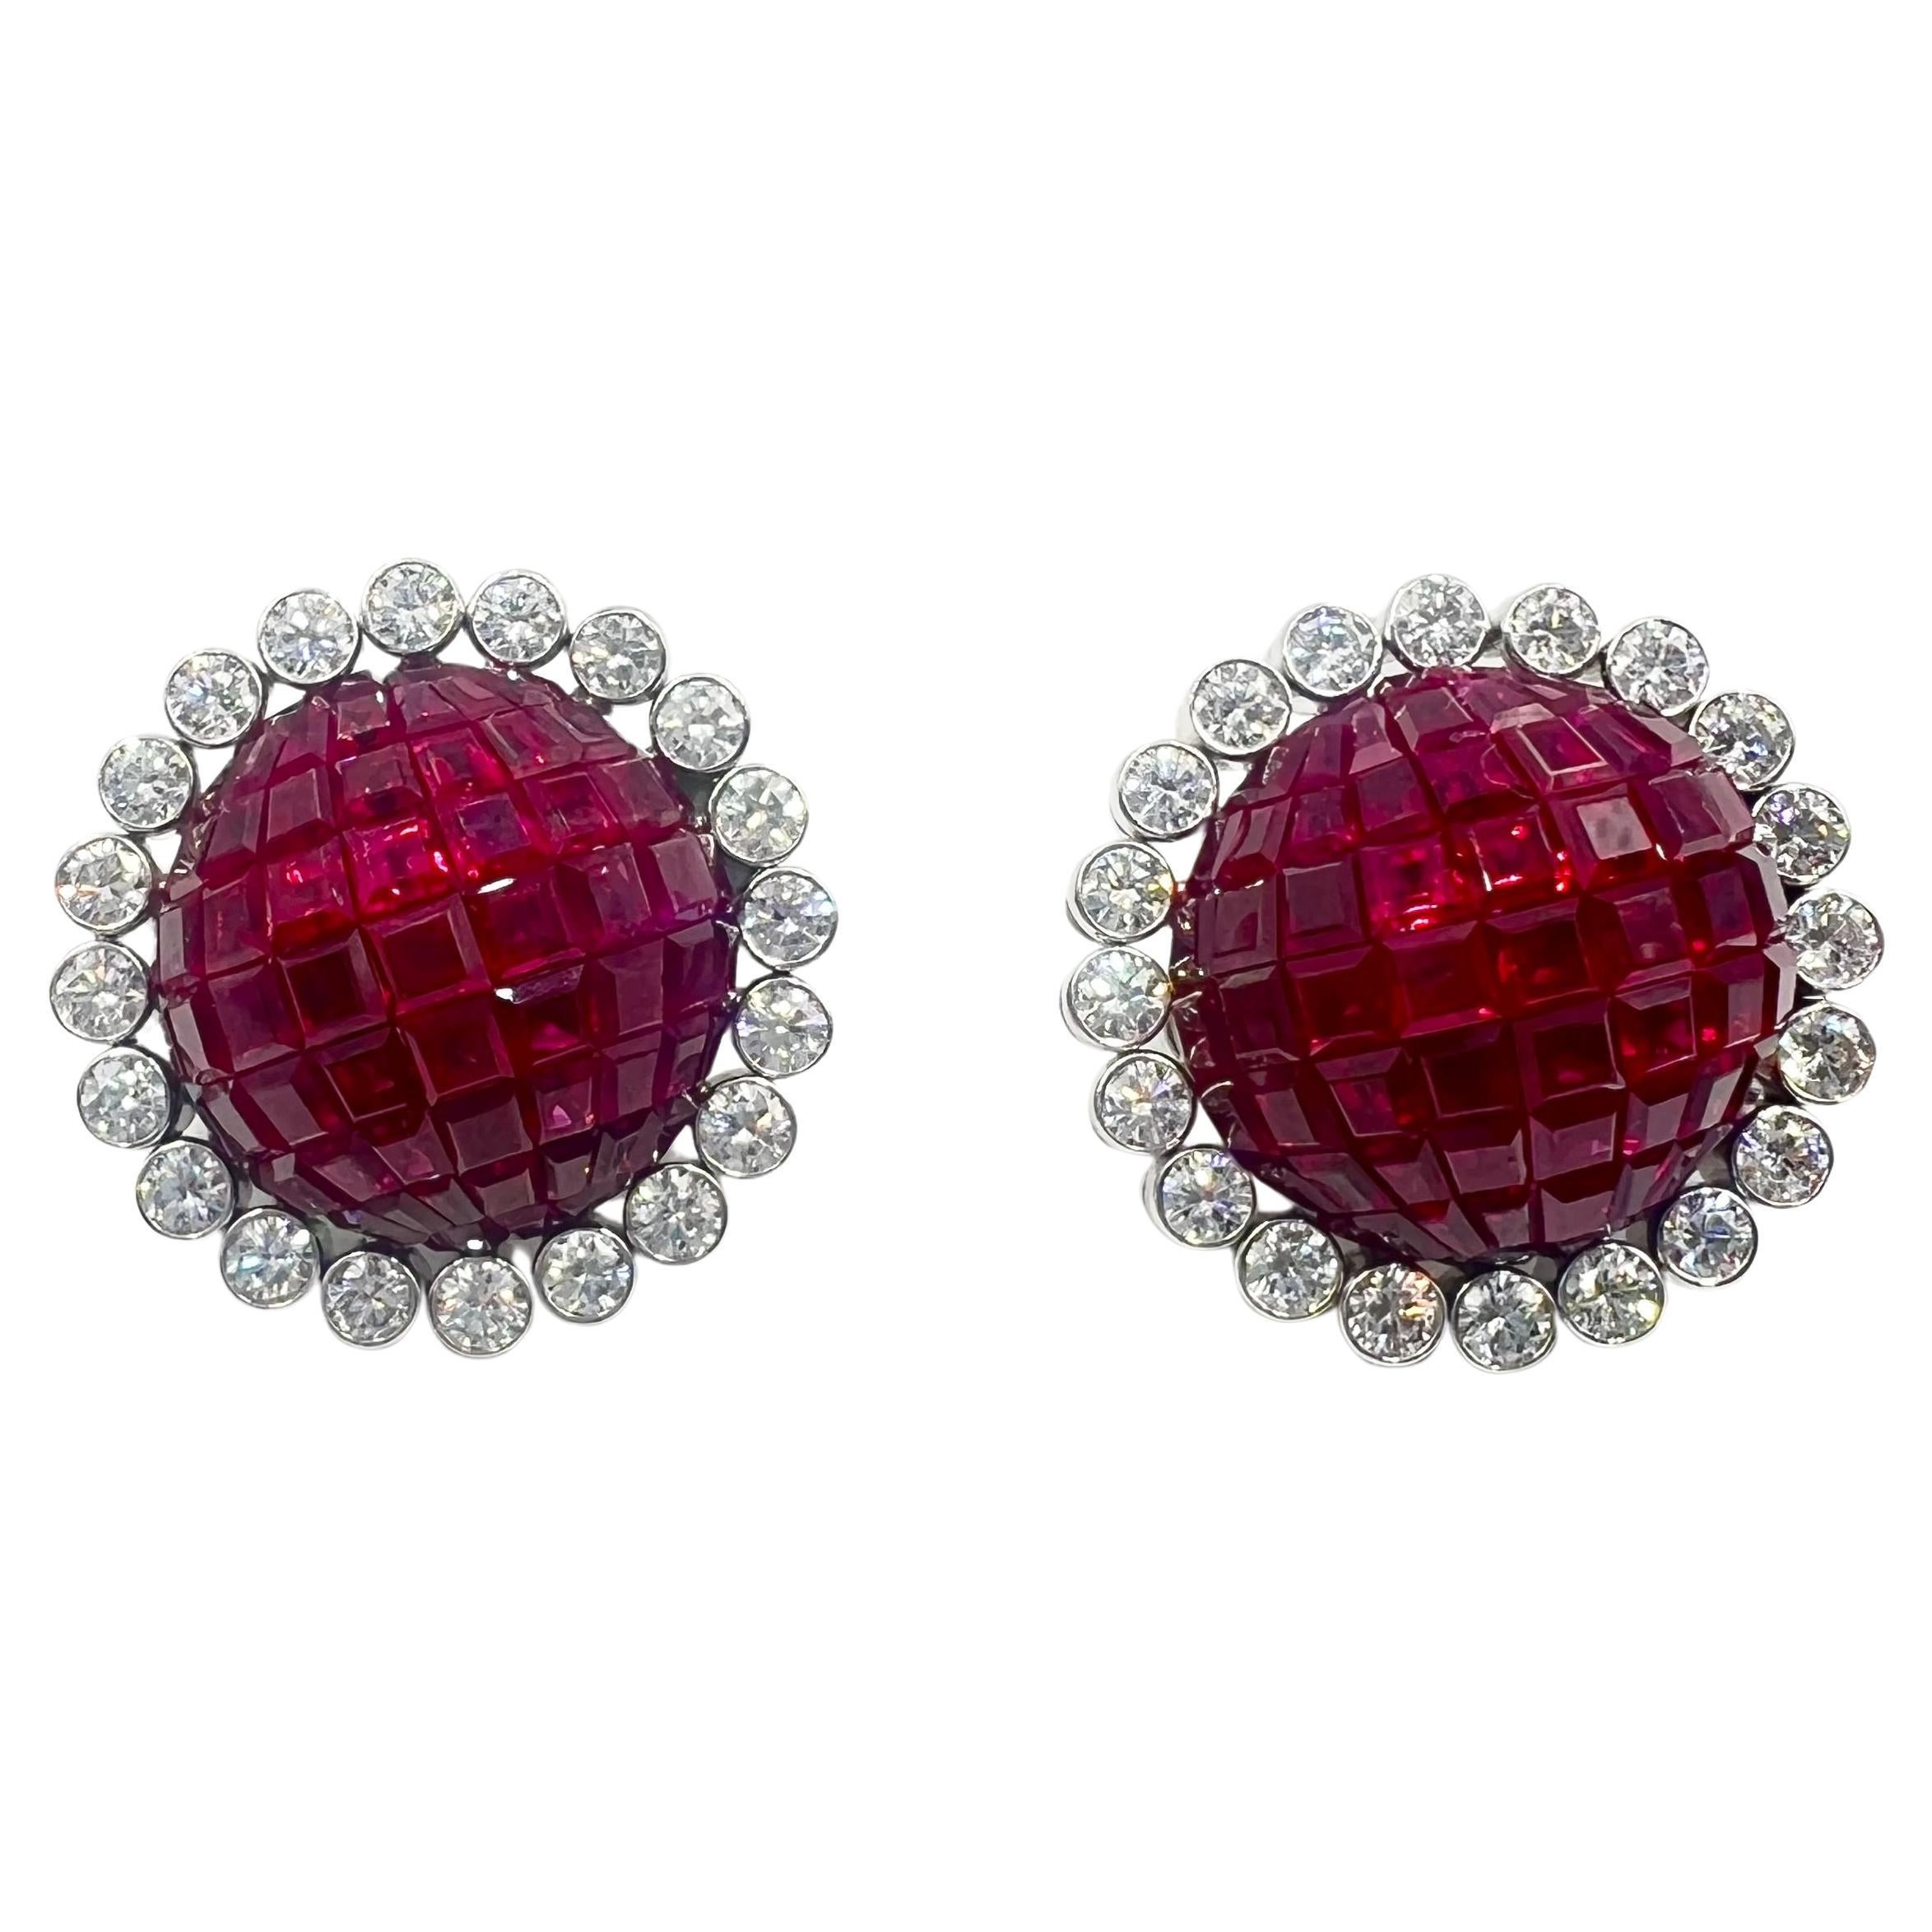 Aletto Brothers Invisible Set Ruby Diamond Platinum Earrings